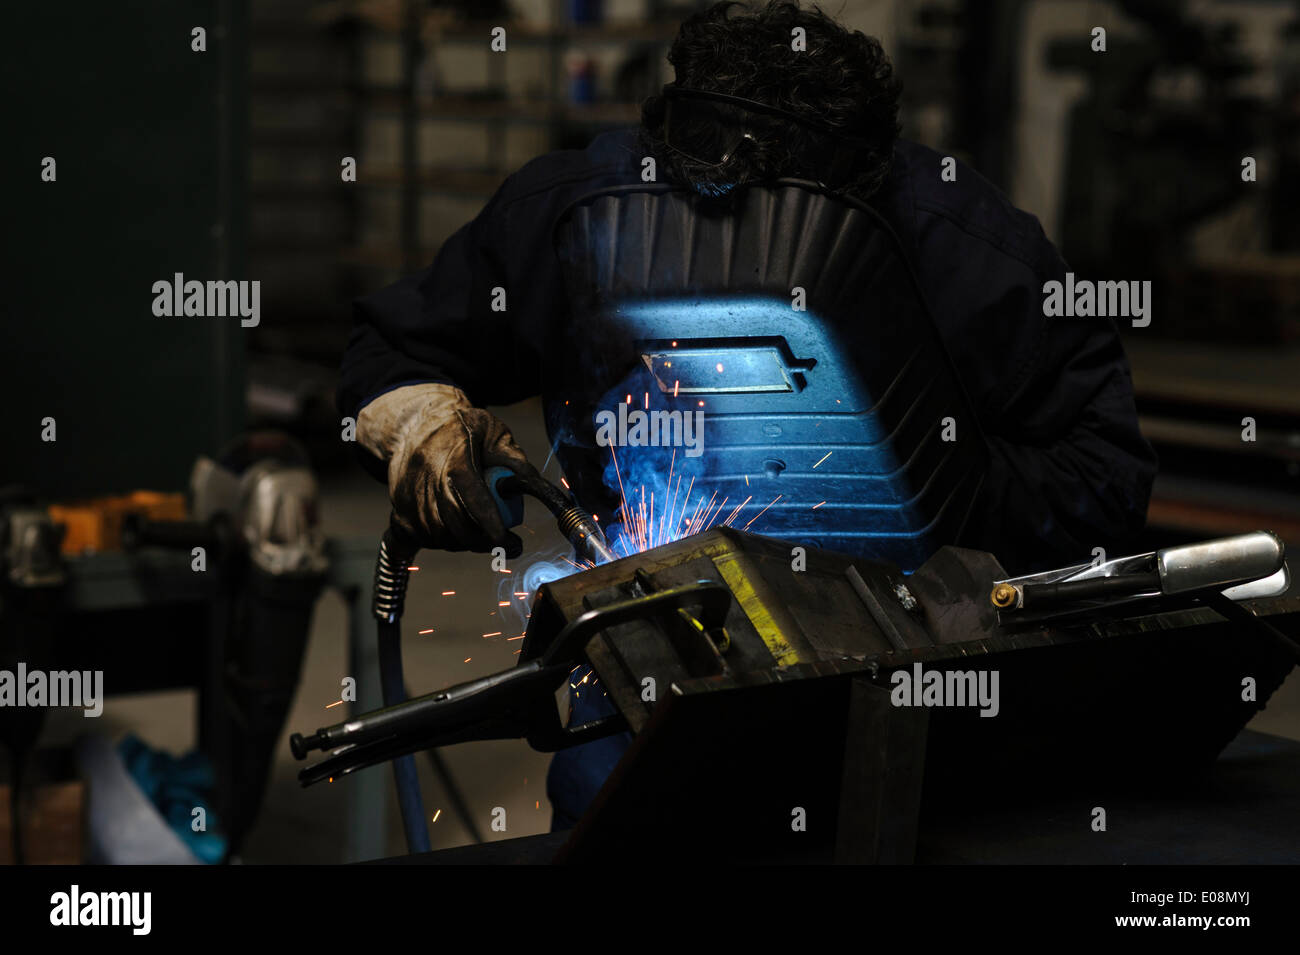 Man welding with safety mask Stock Photo